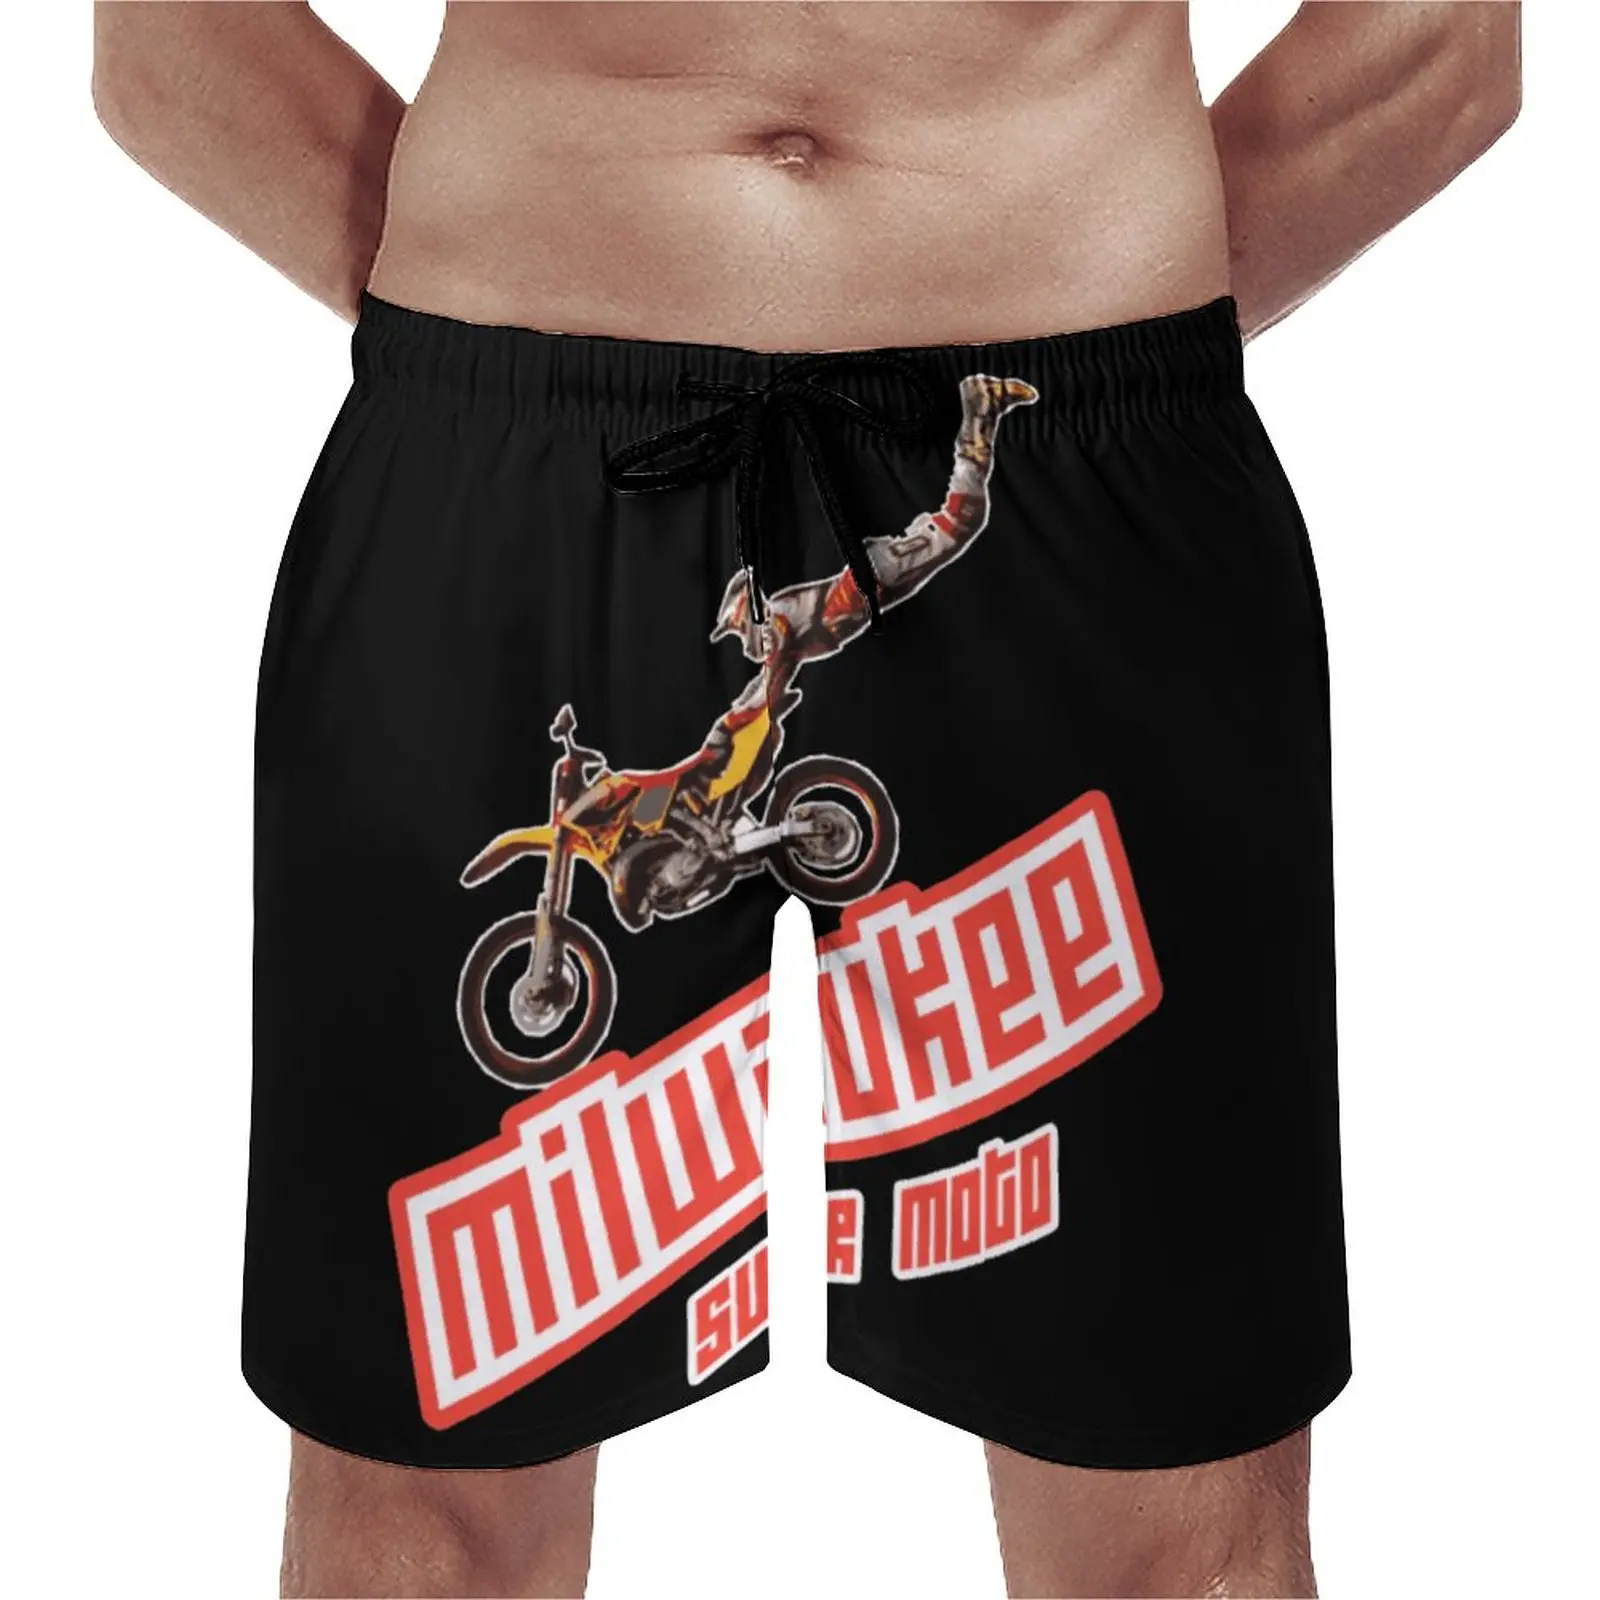 

Milwaukees Tools Super Pullover Summertime Arbitrary Beach Shorts Sea Beach Breathable Quick Dry Funny Graphic Running Adjustab